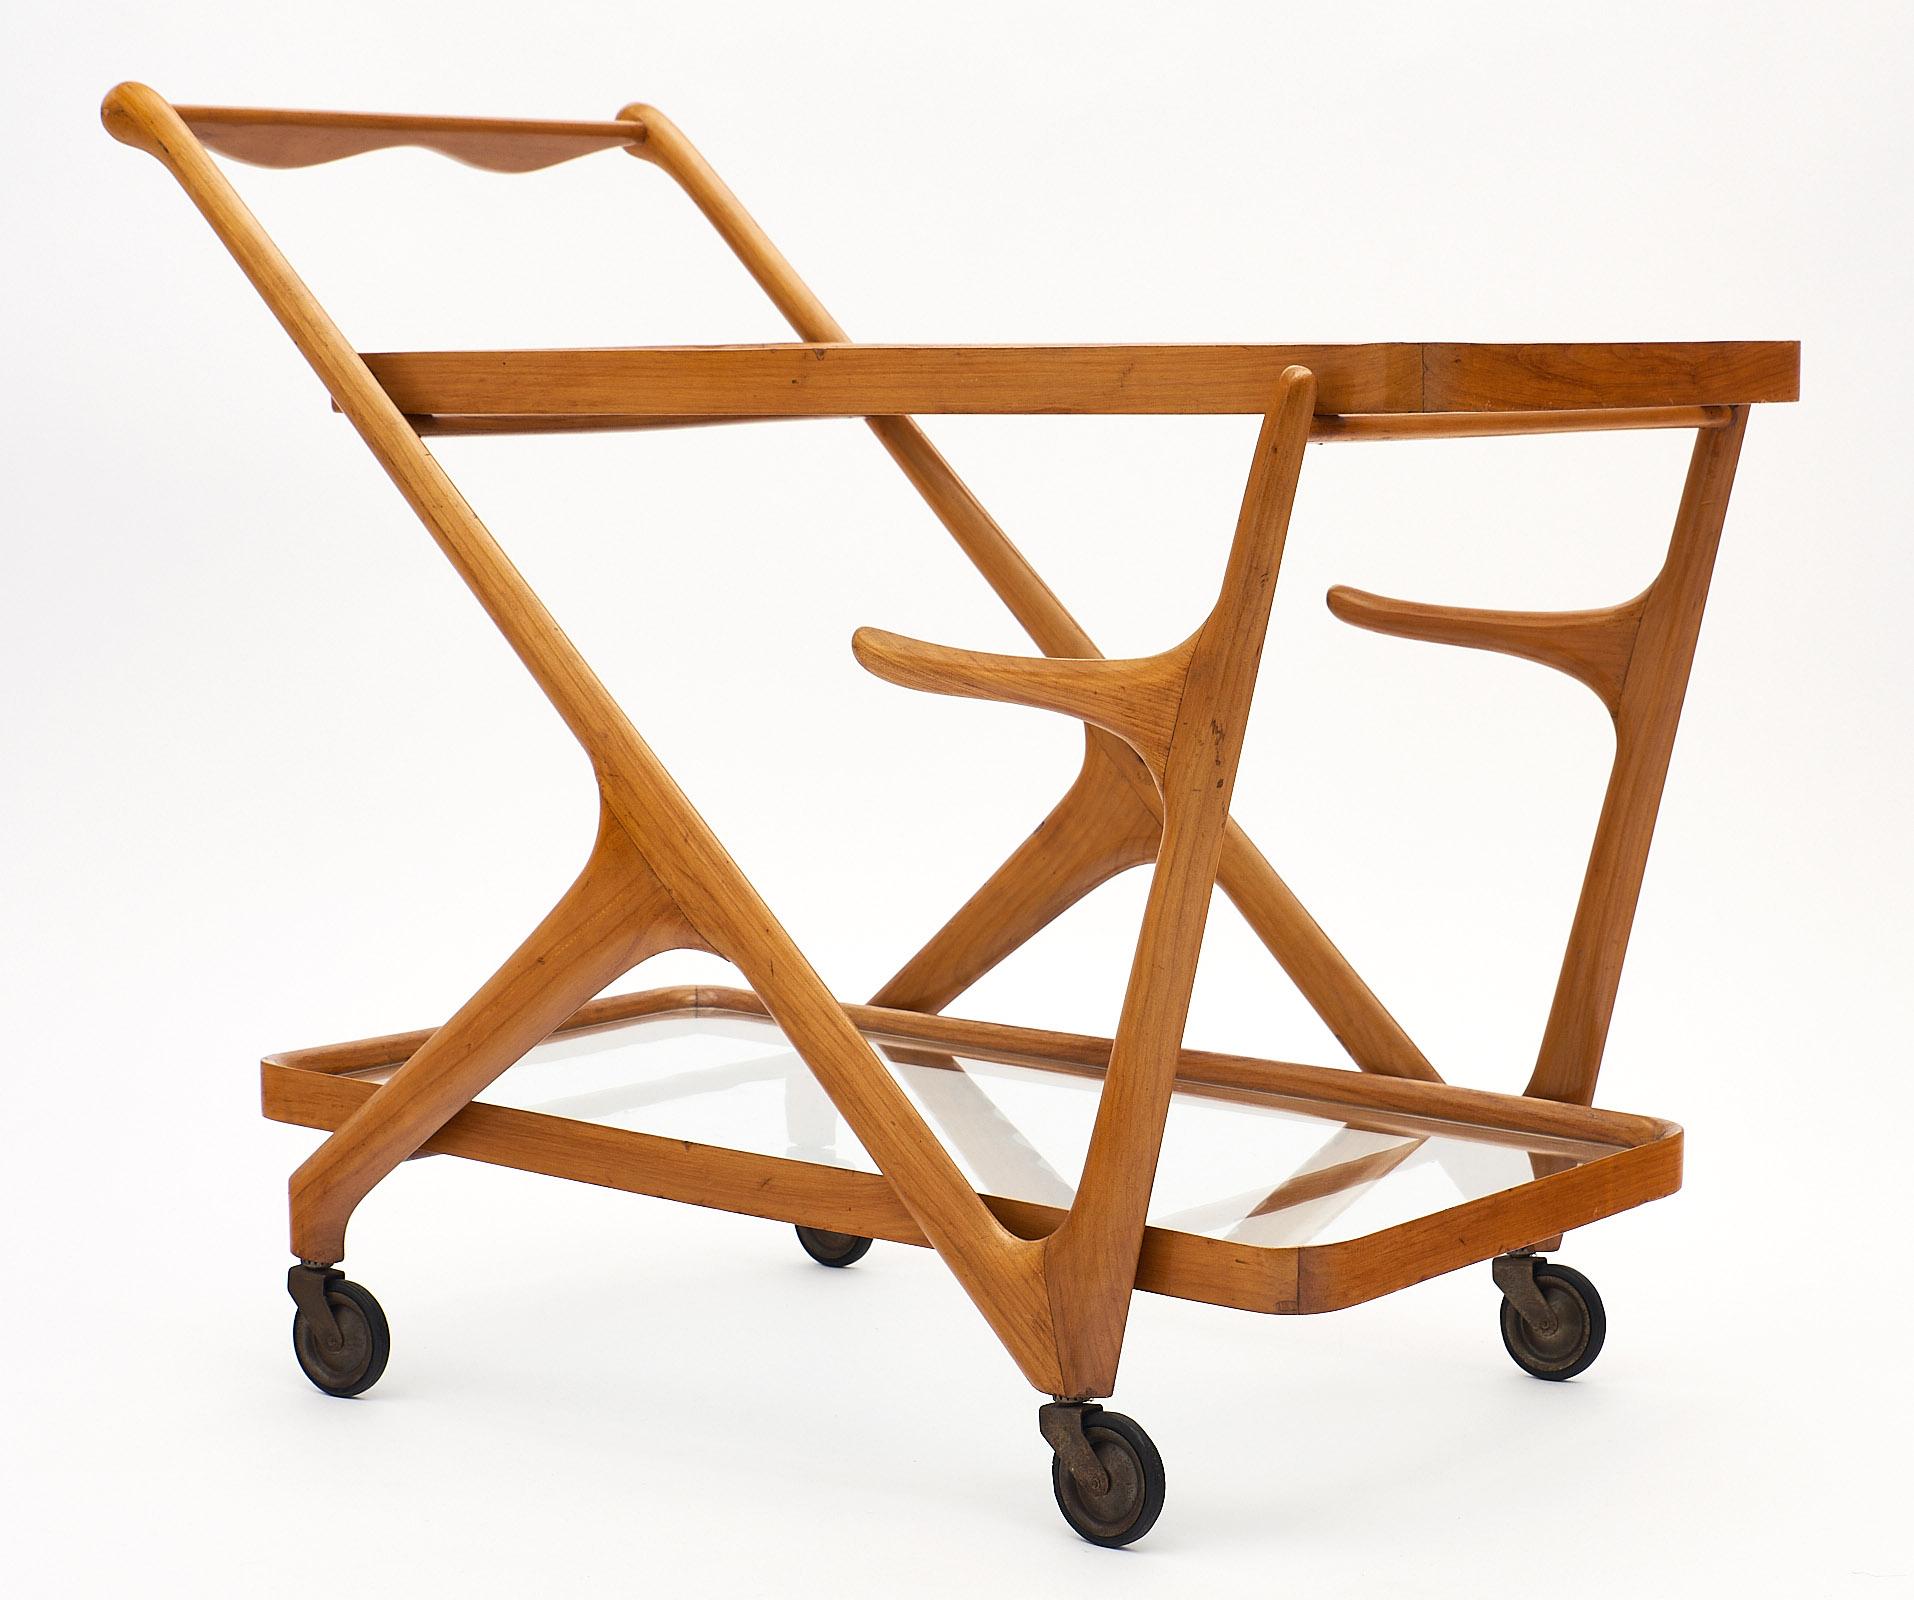 Italian bar cart in the manner of Paolo Buffa. This piece is made of solid, high-quality birch wood with a dynamic modernist structure. There are two glass shelves, and the cart rolls on original working casters. We love the small tray and